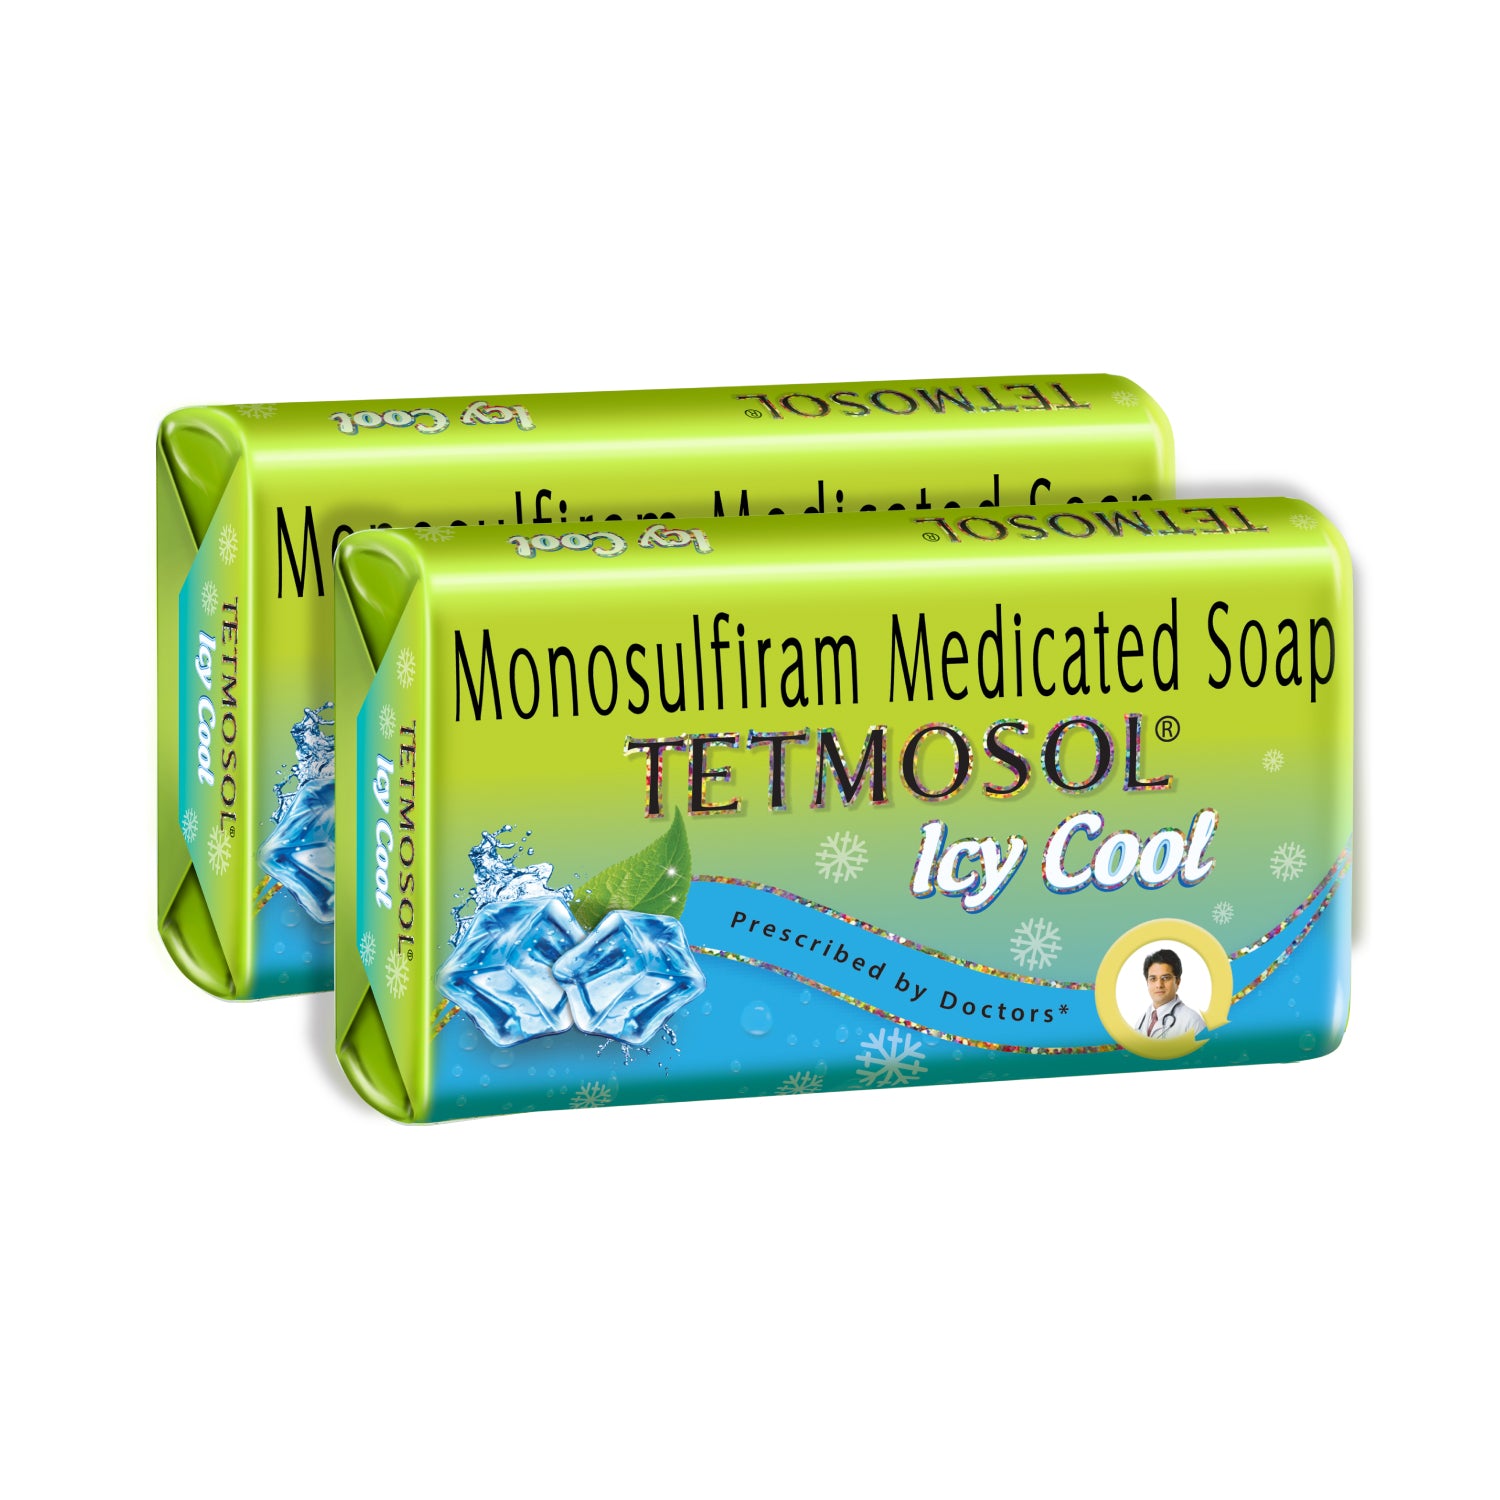 Tetmosol icy cool soap pack of 2